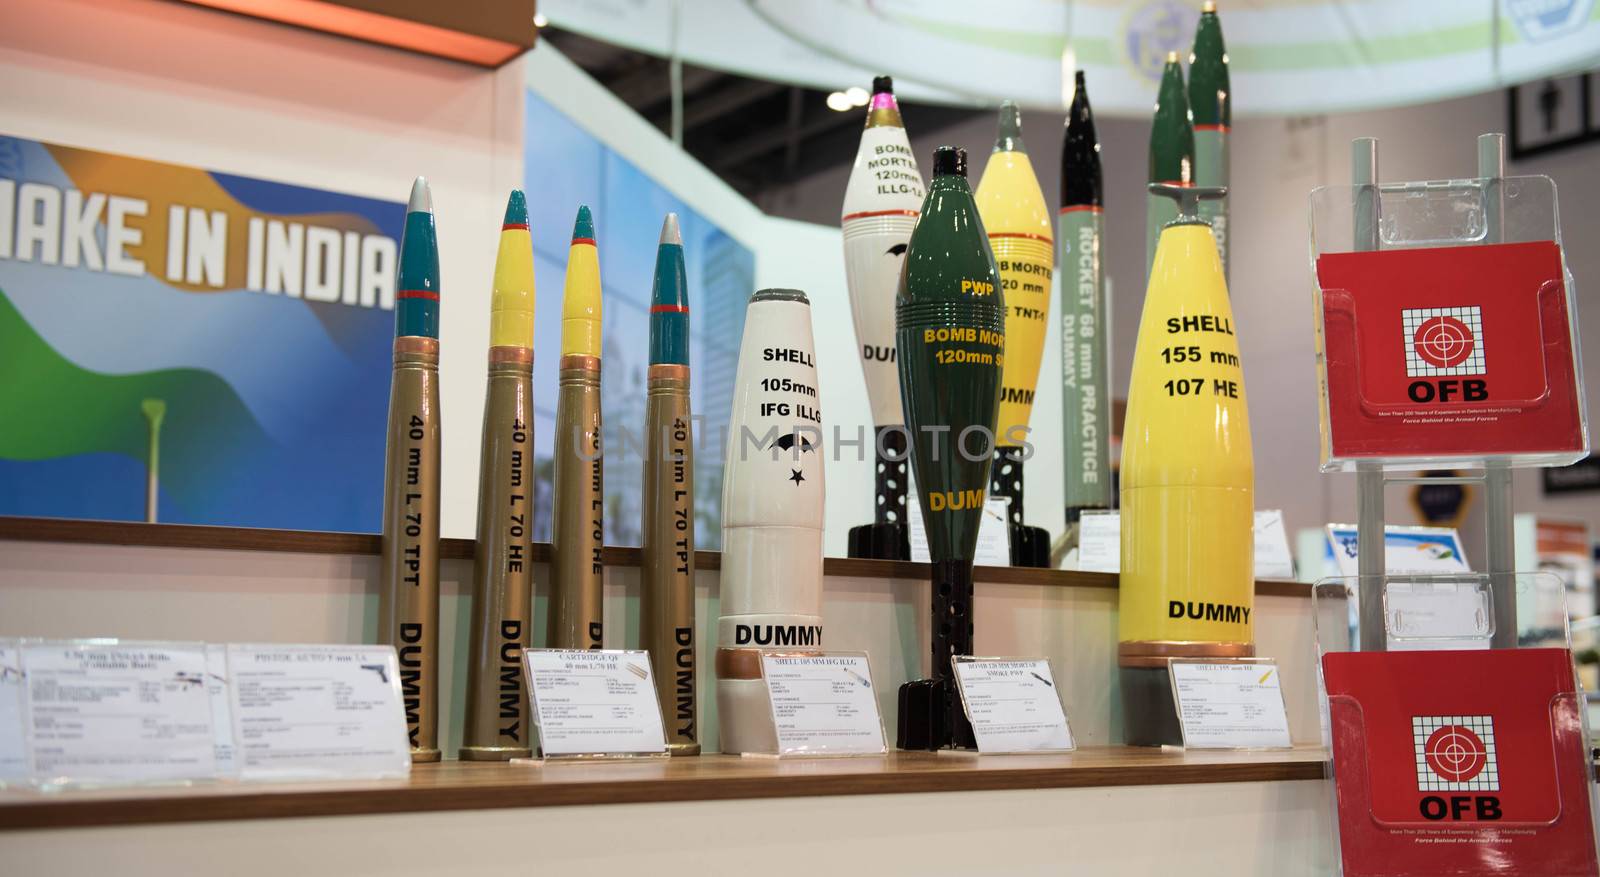 UNITED KINGDOM, London: Ammunition	The Defence and Security International Exhibition (DSEI) began in London on September 15, 2015 despite a week of direct action protests by peace campaigners.  	The arms fair has seen over 30,000 people descend on London to see the 1,500 exhibitors who are displaying weapons of war from pistols and rifles up to tanks, assault helicopters and warships.  	Protesters attempted to block the main road into the exhibition, claiming that such an event strengthened the UK's ties to human rights abuses. 